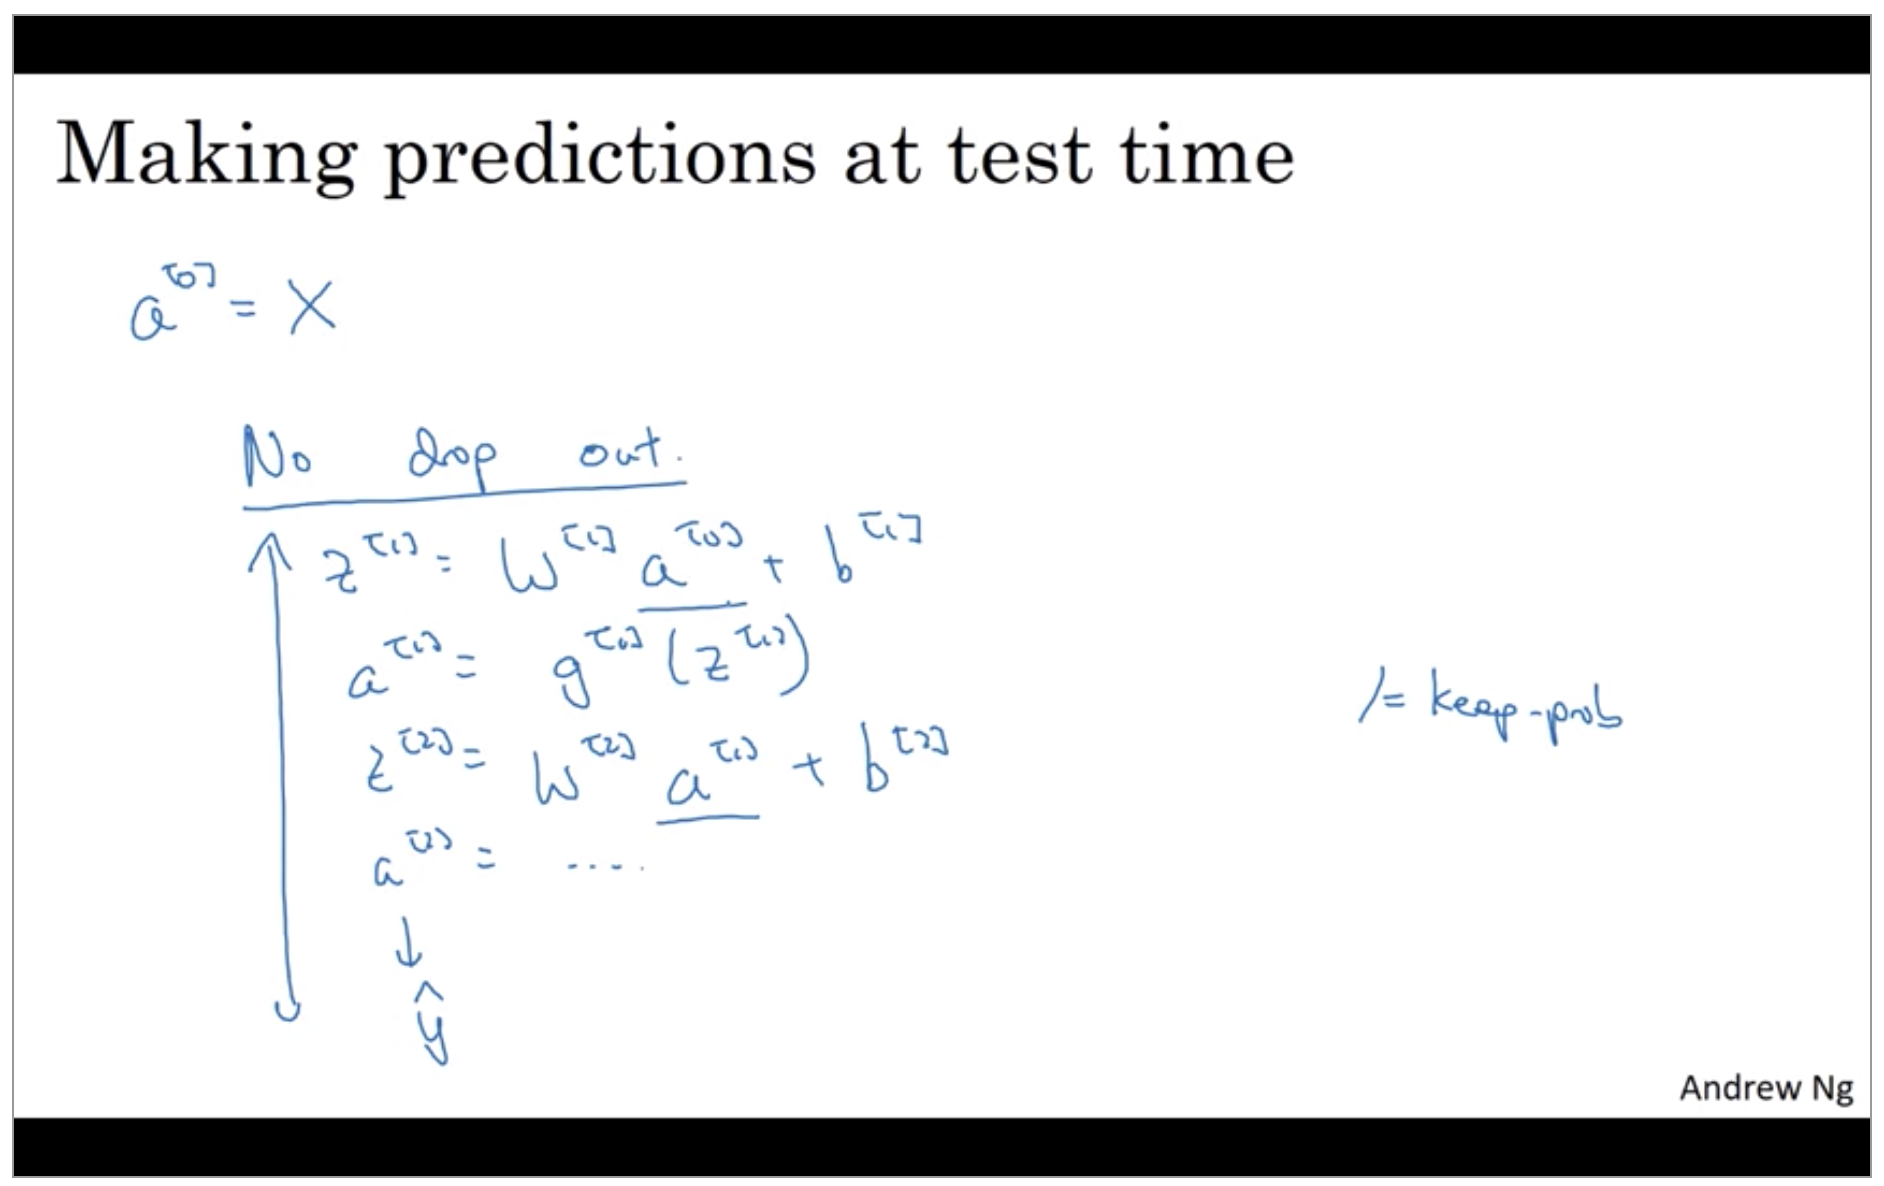 making-predictions-at-test-time.png